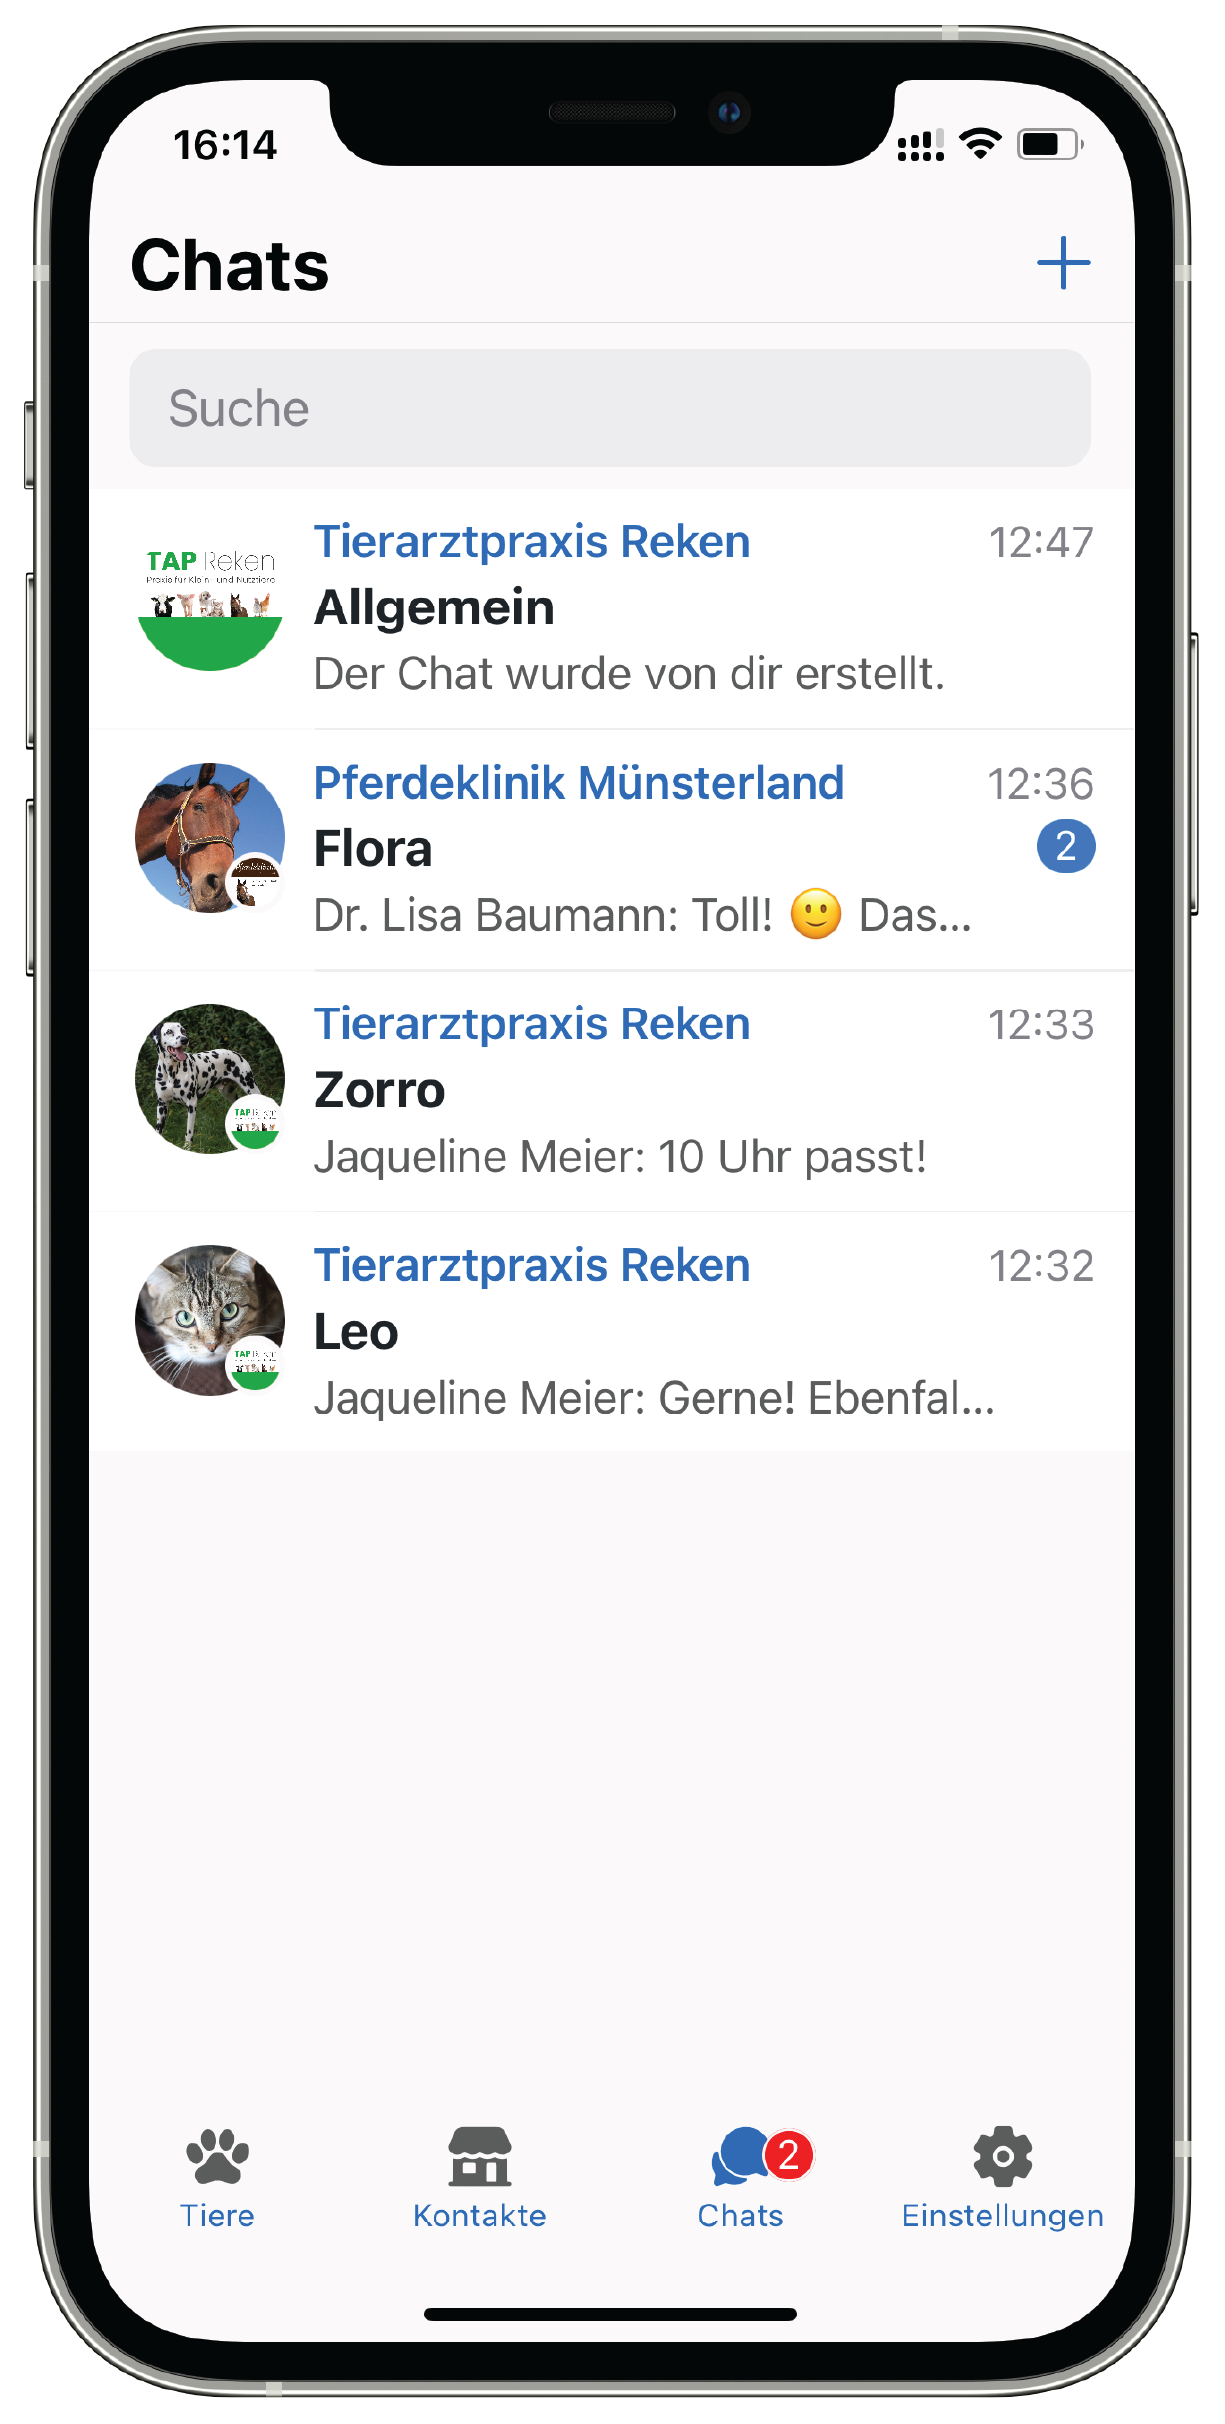 AnimalChat app showing chats